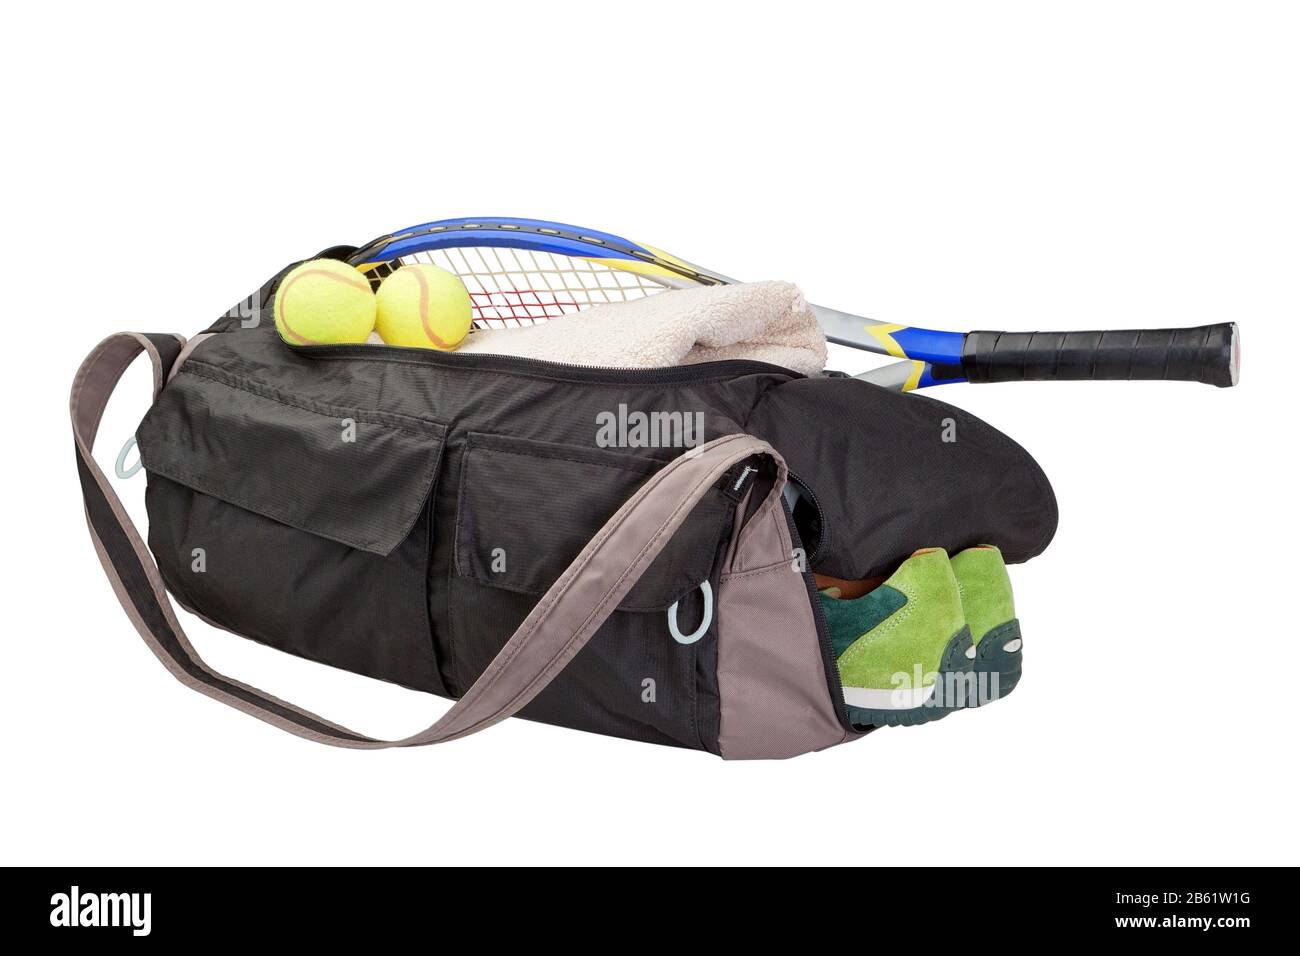 Tennis bag. With the racket and tennis ball. Stock Photo